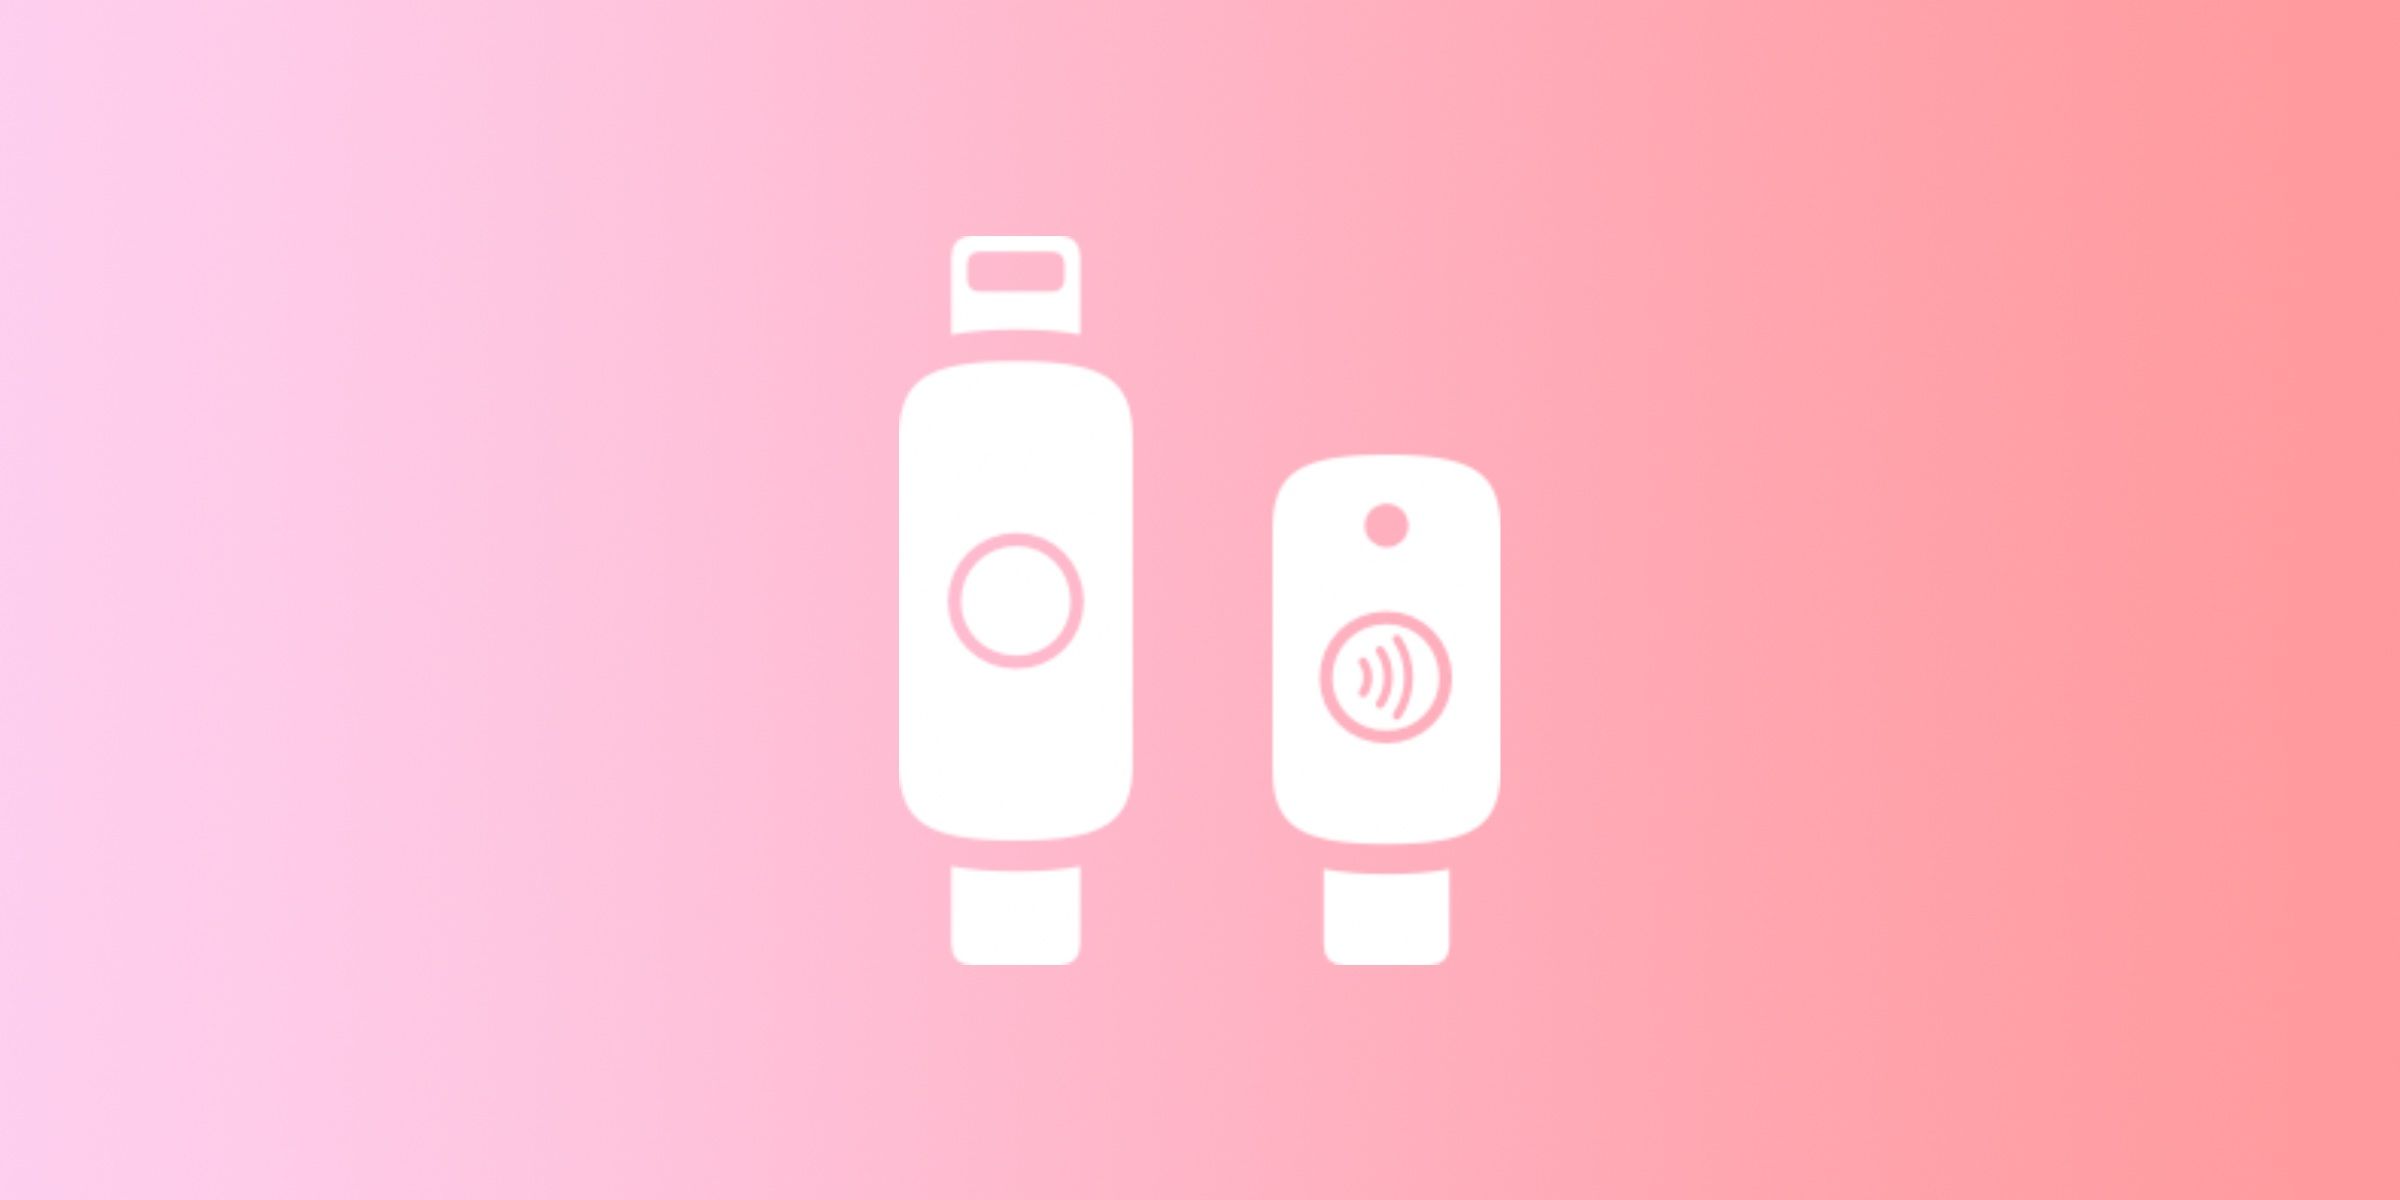 Graphic showing USB and NFC-enabled Security Keys against a pink gradient background.